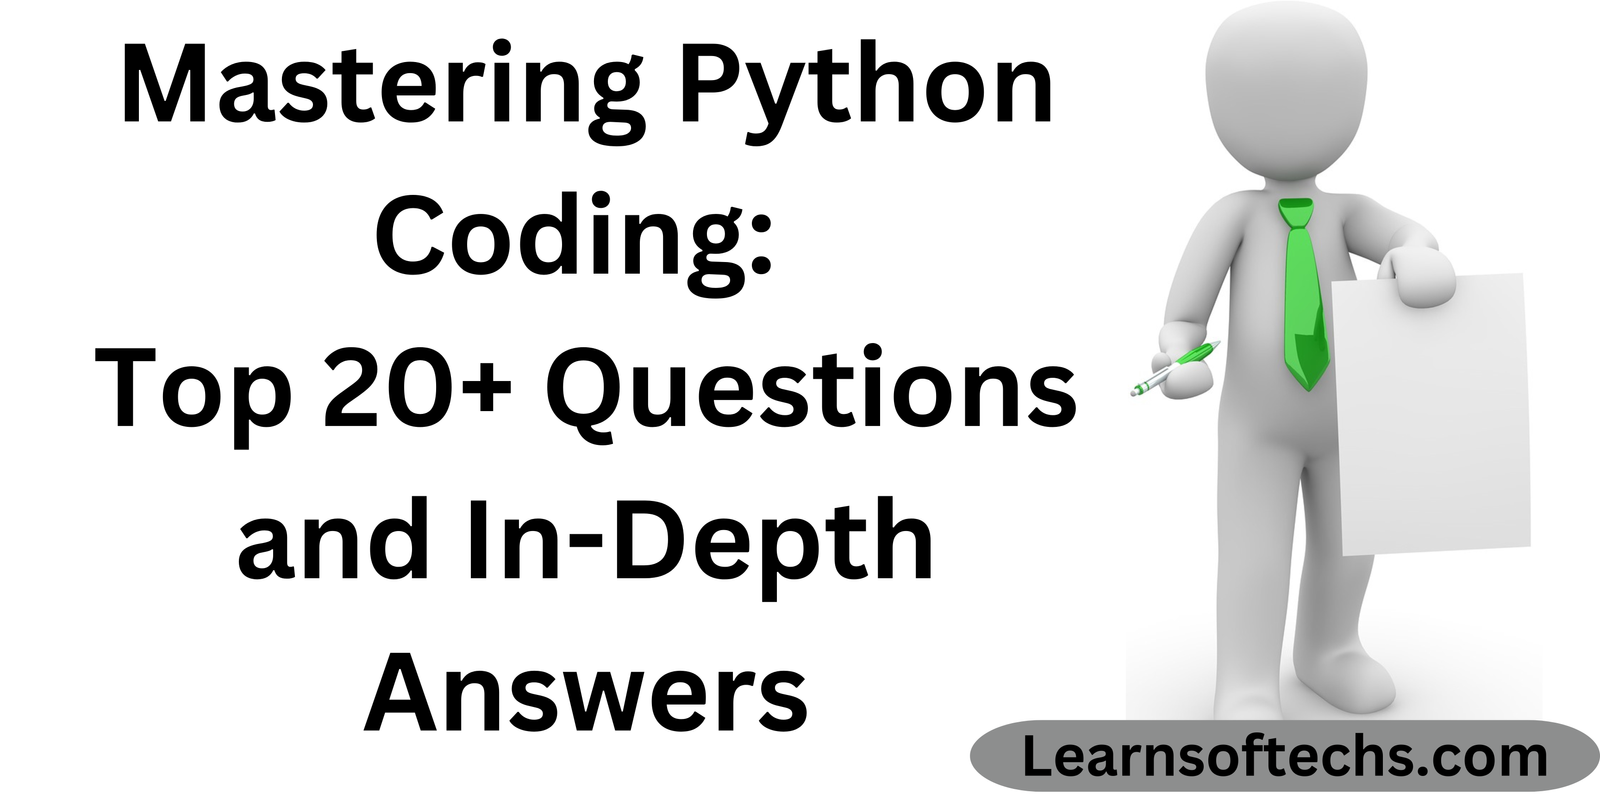 Mastering Python Coding: Top 10+ Questions and In-Depth Answers